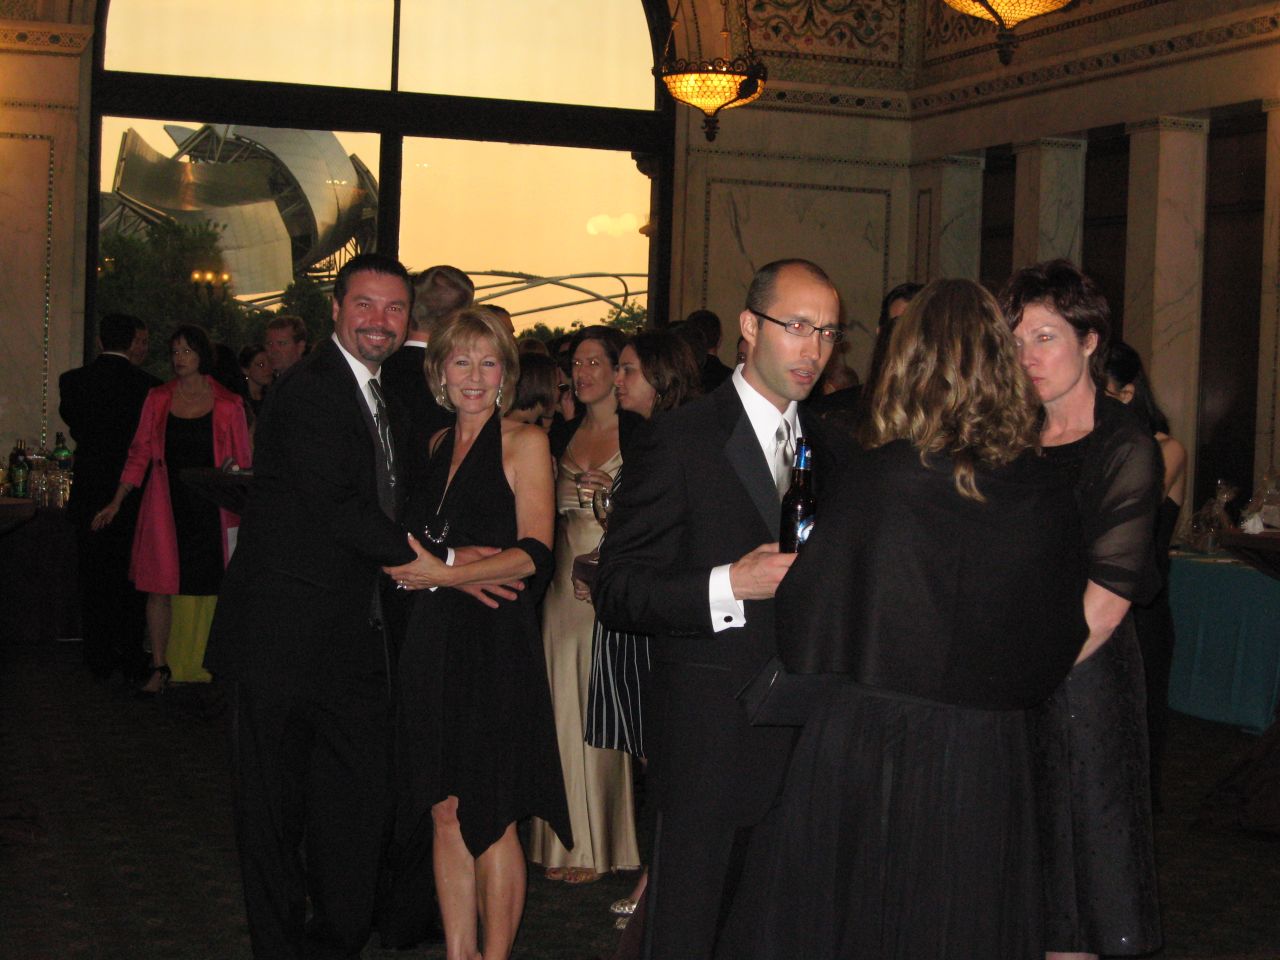 The Summer Soiree was held at the Chicago Cultural Center.